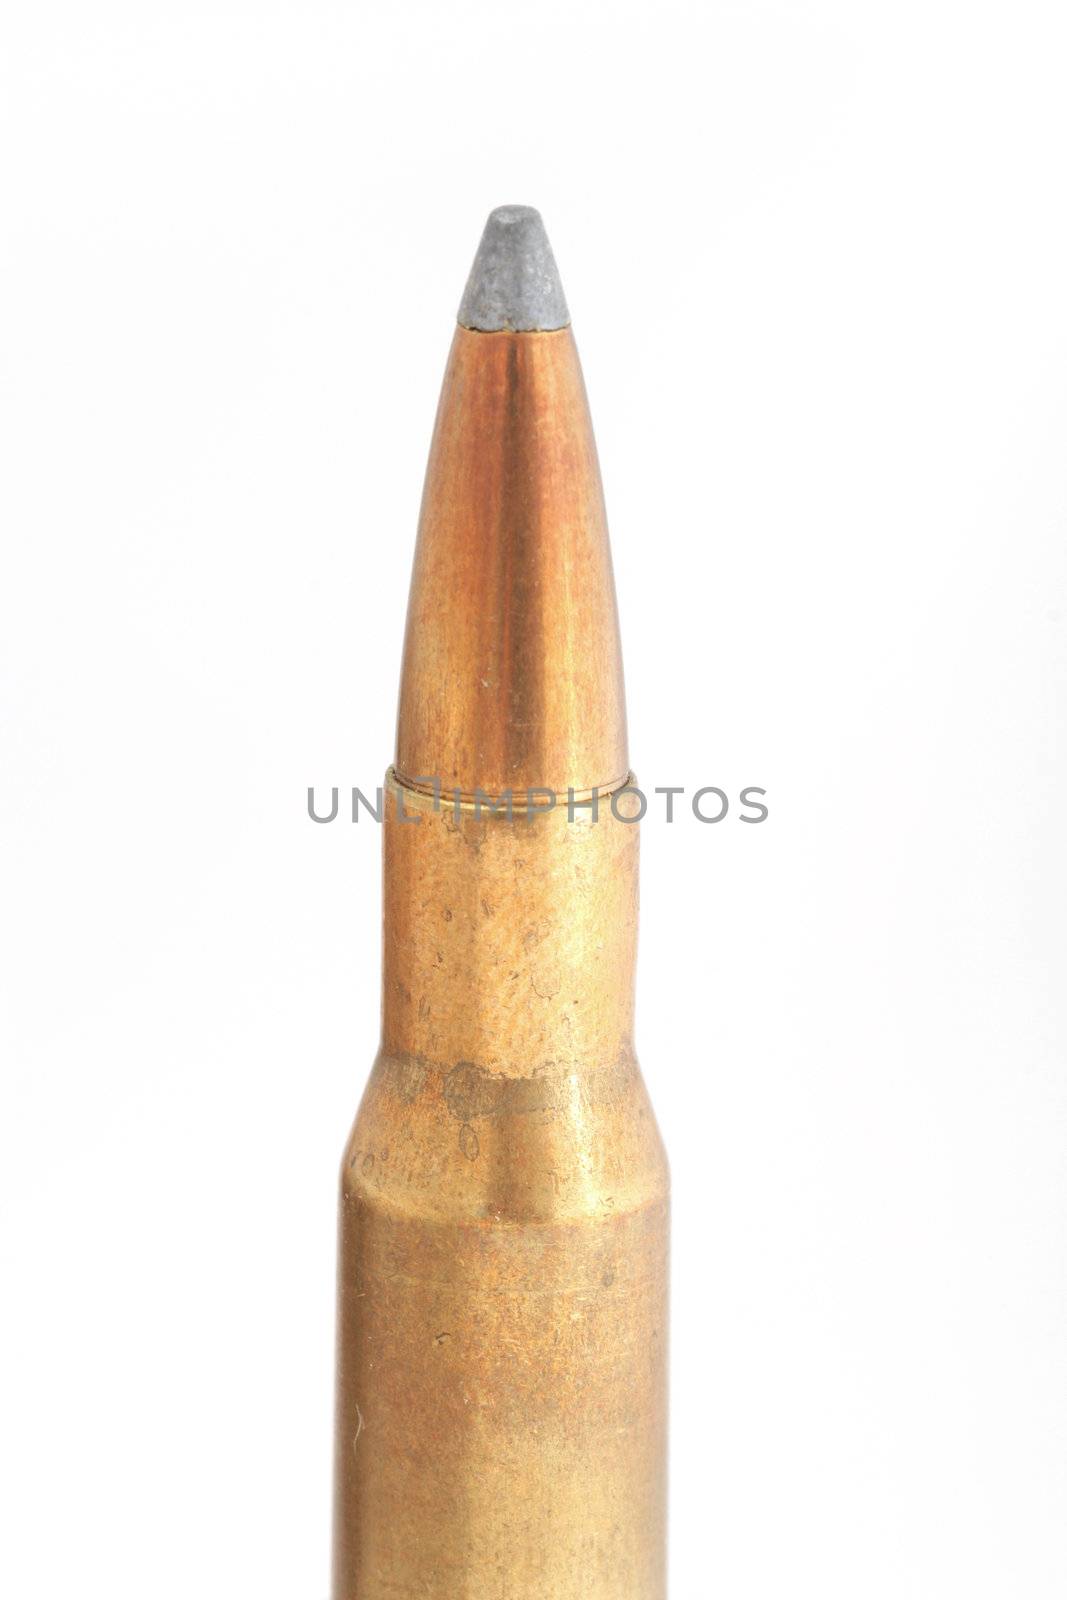 top half of a rifle bullet, big caliber 30-06, isolated on white